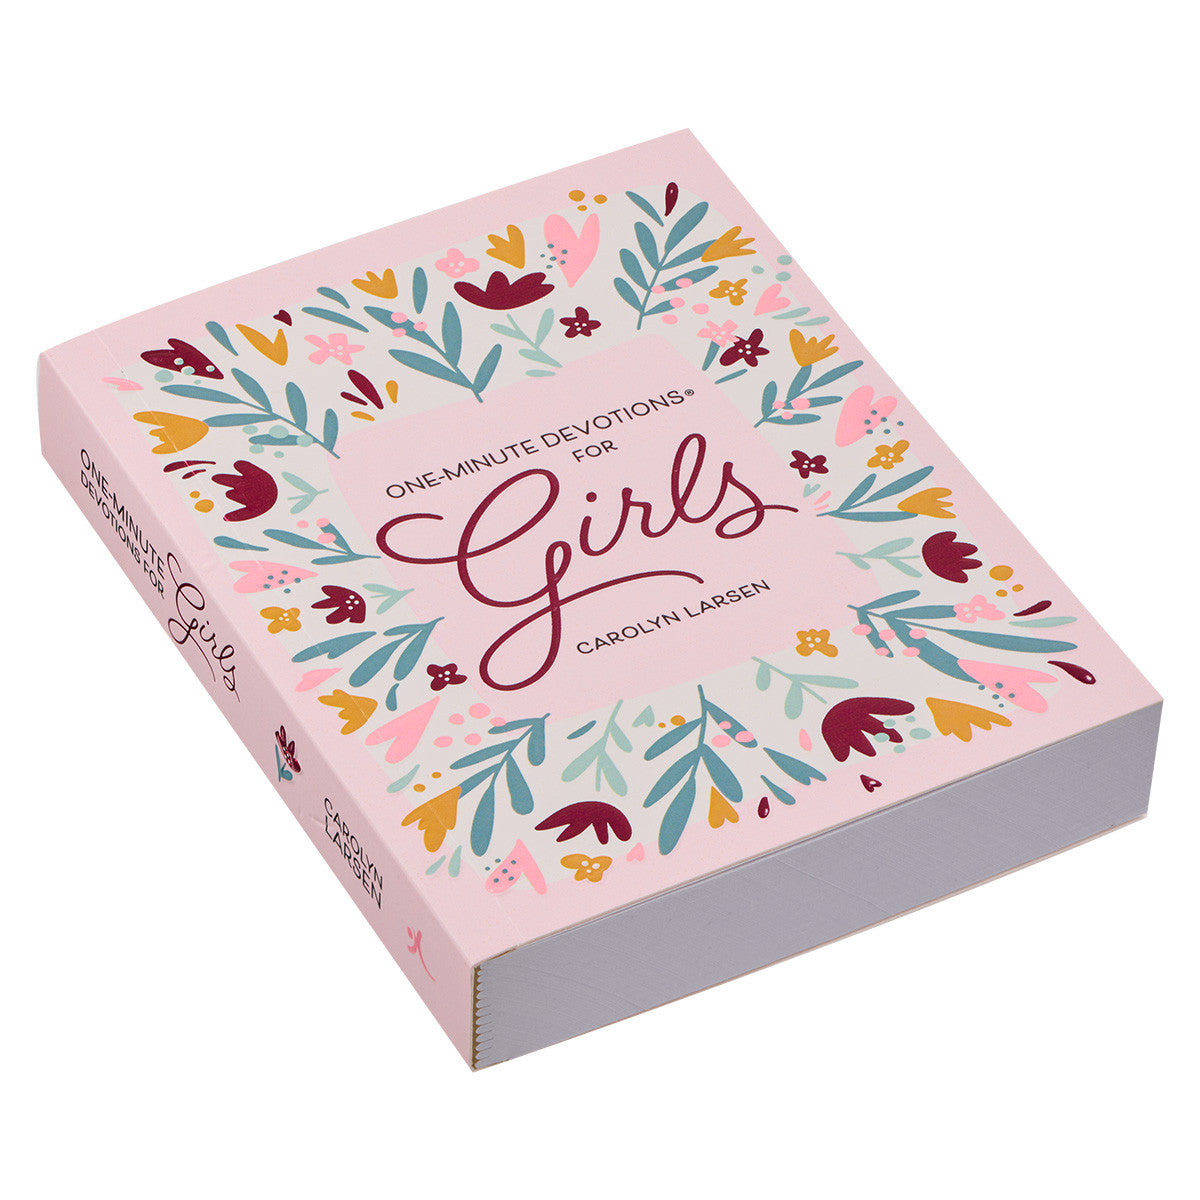 One-Minute Devotions for Girls Softcover - The Christian Gift Company